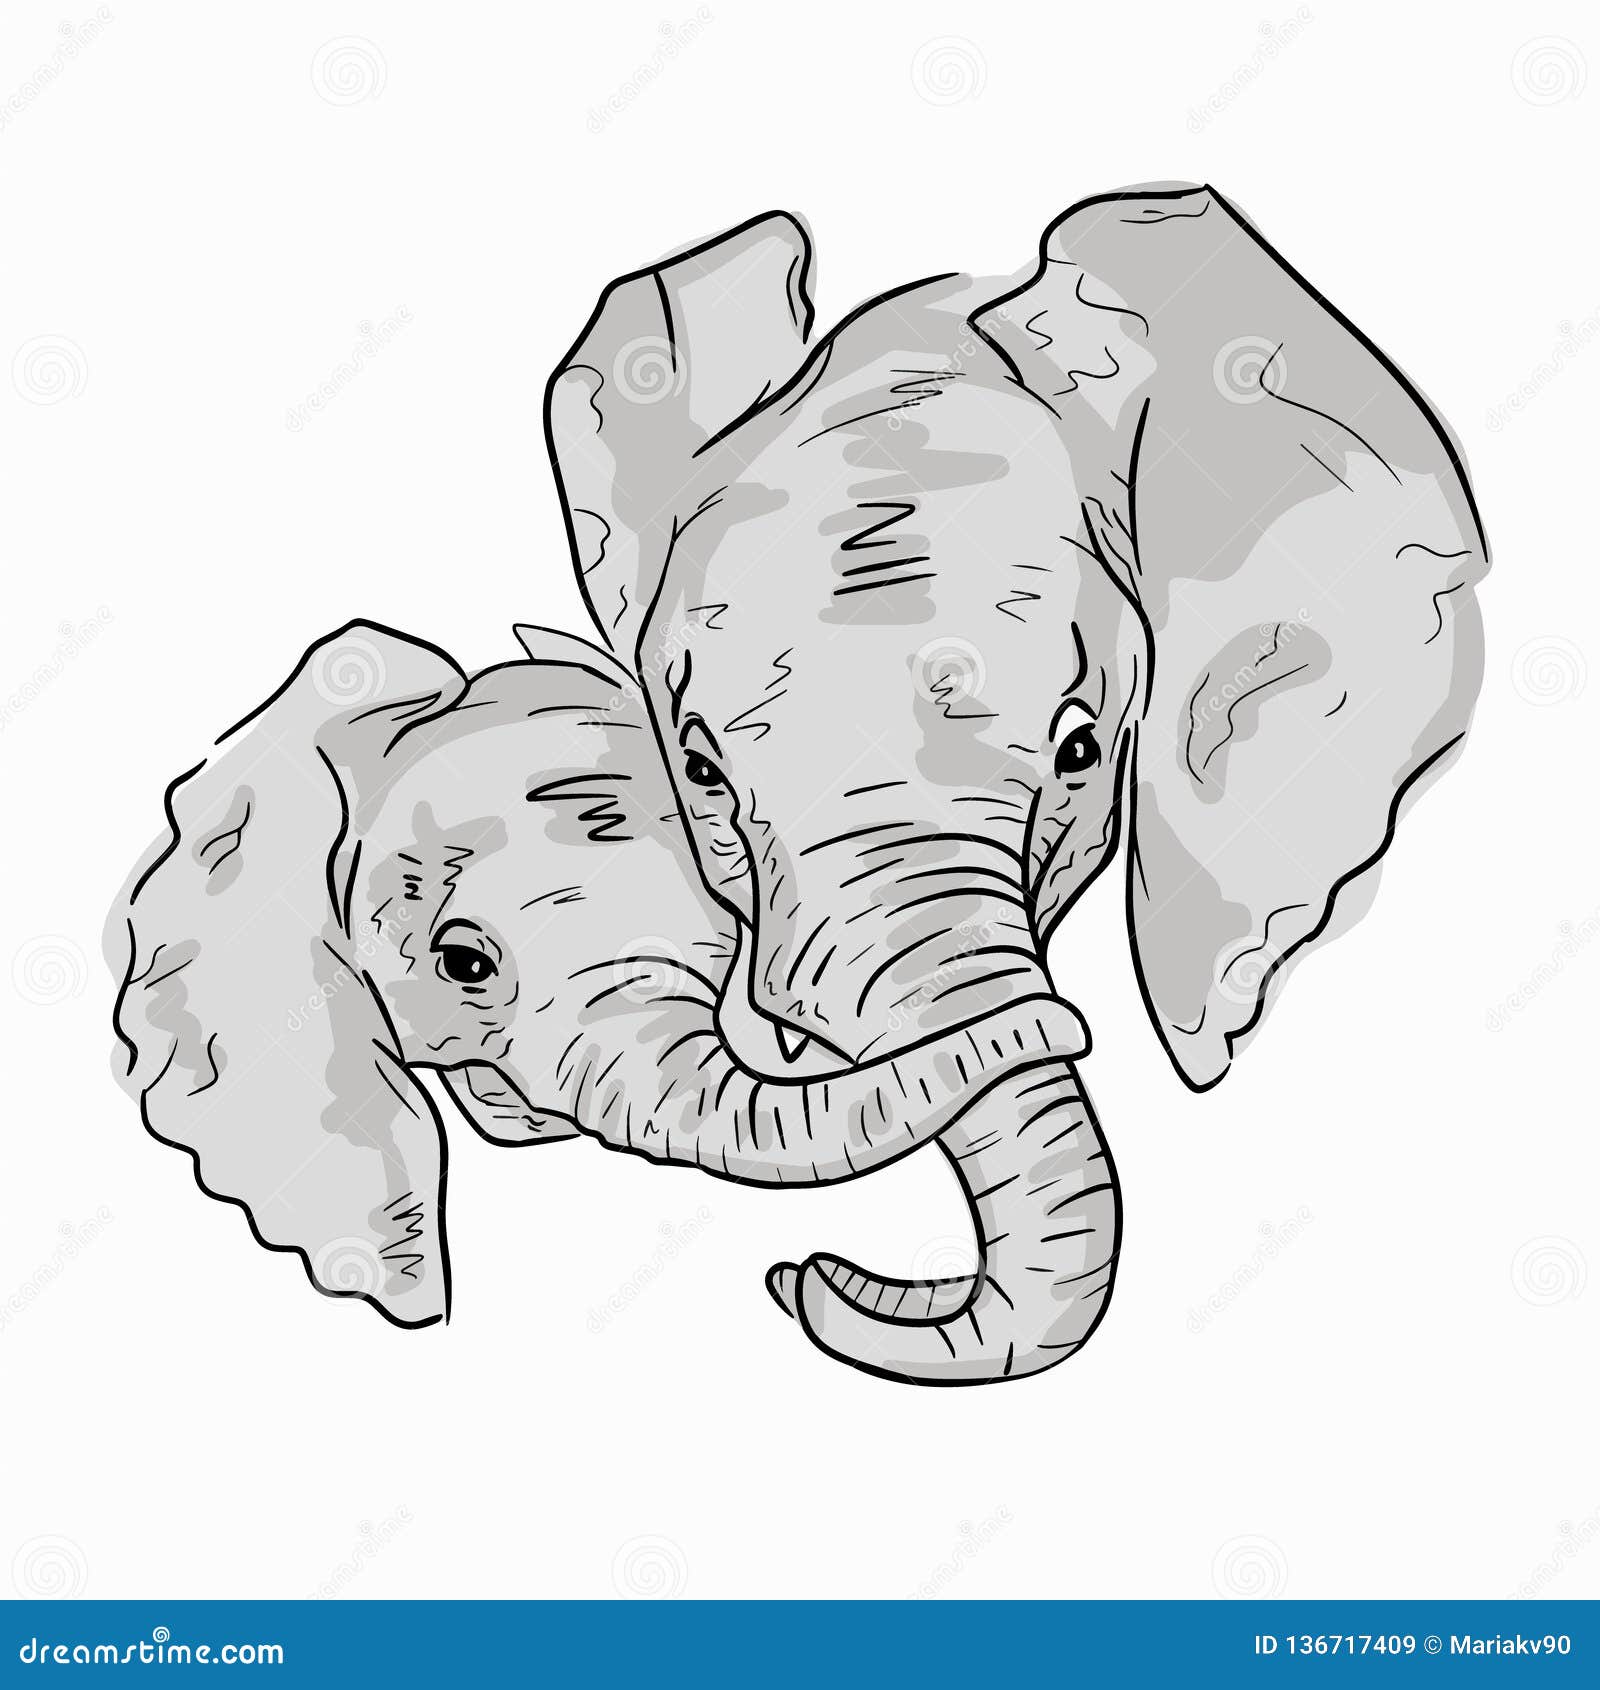 How to Draw Elephants with Step by Step Drawing Tutorial  How to Draw Step  by Step Drawing Tutorials  Elephant drawing Indian elephant drawing Step  by step drawing